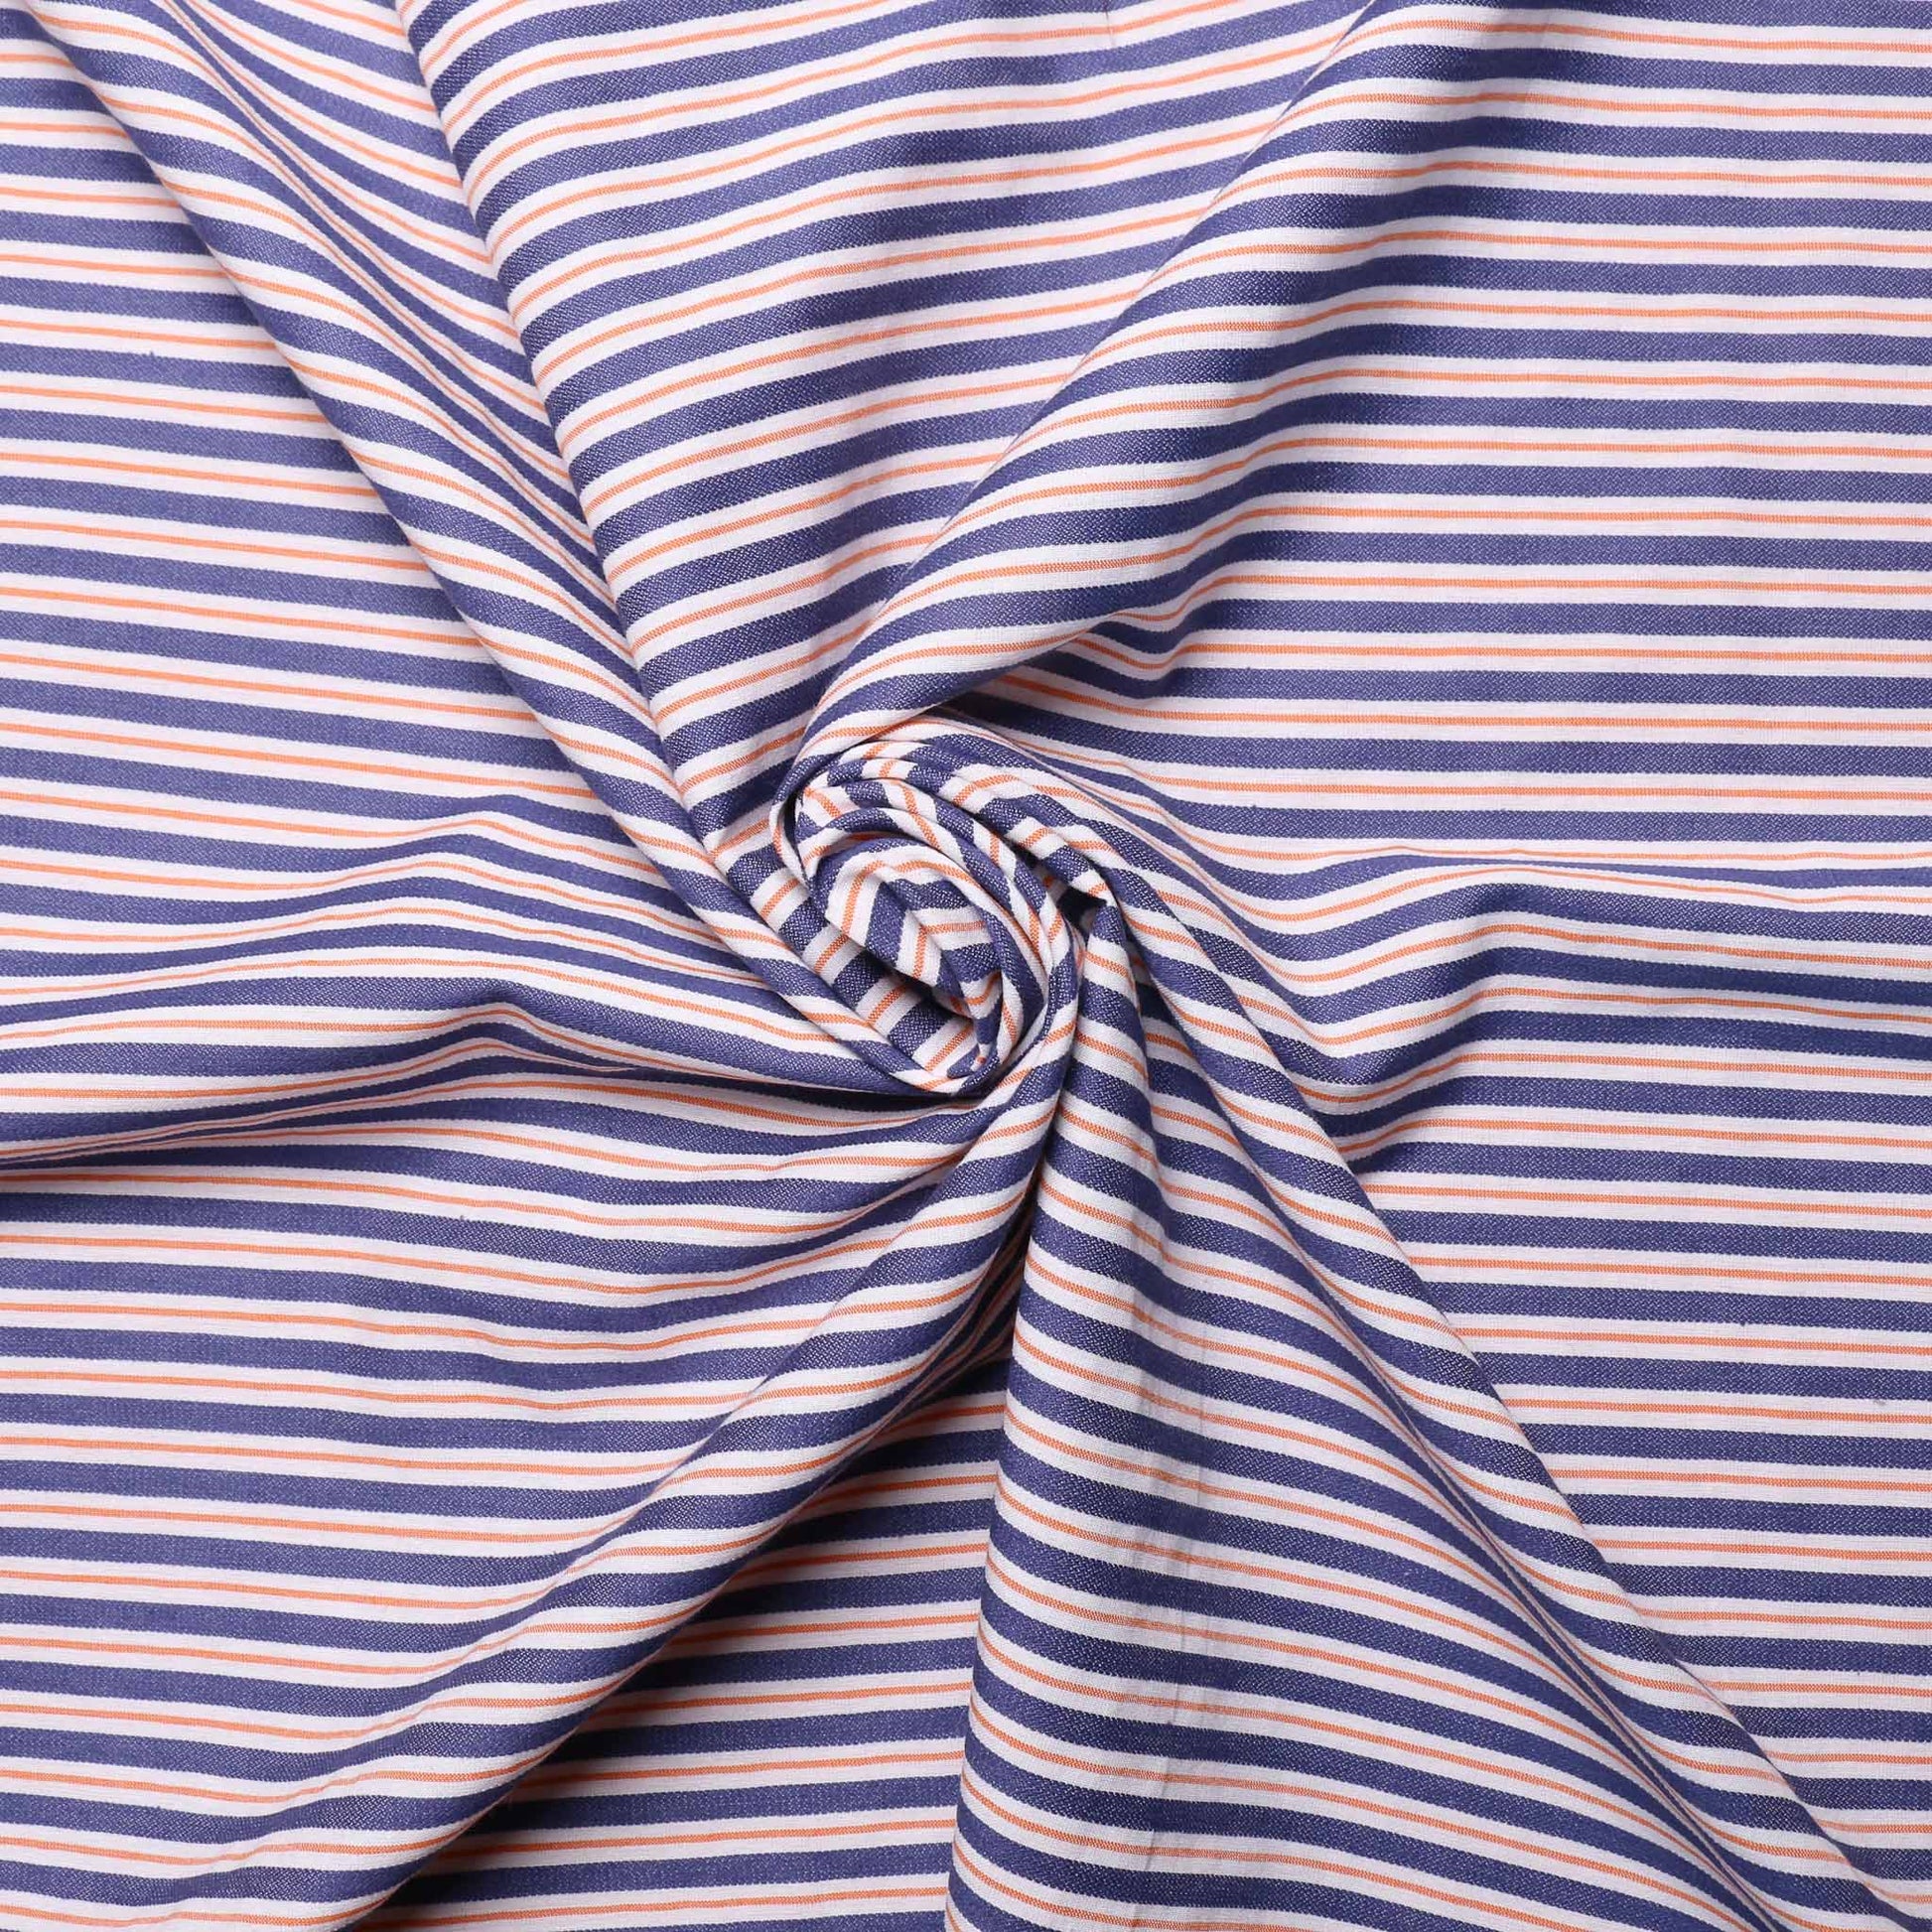 blue dress denim fabric with yellow and white striped design